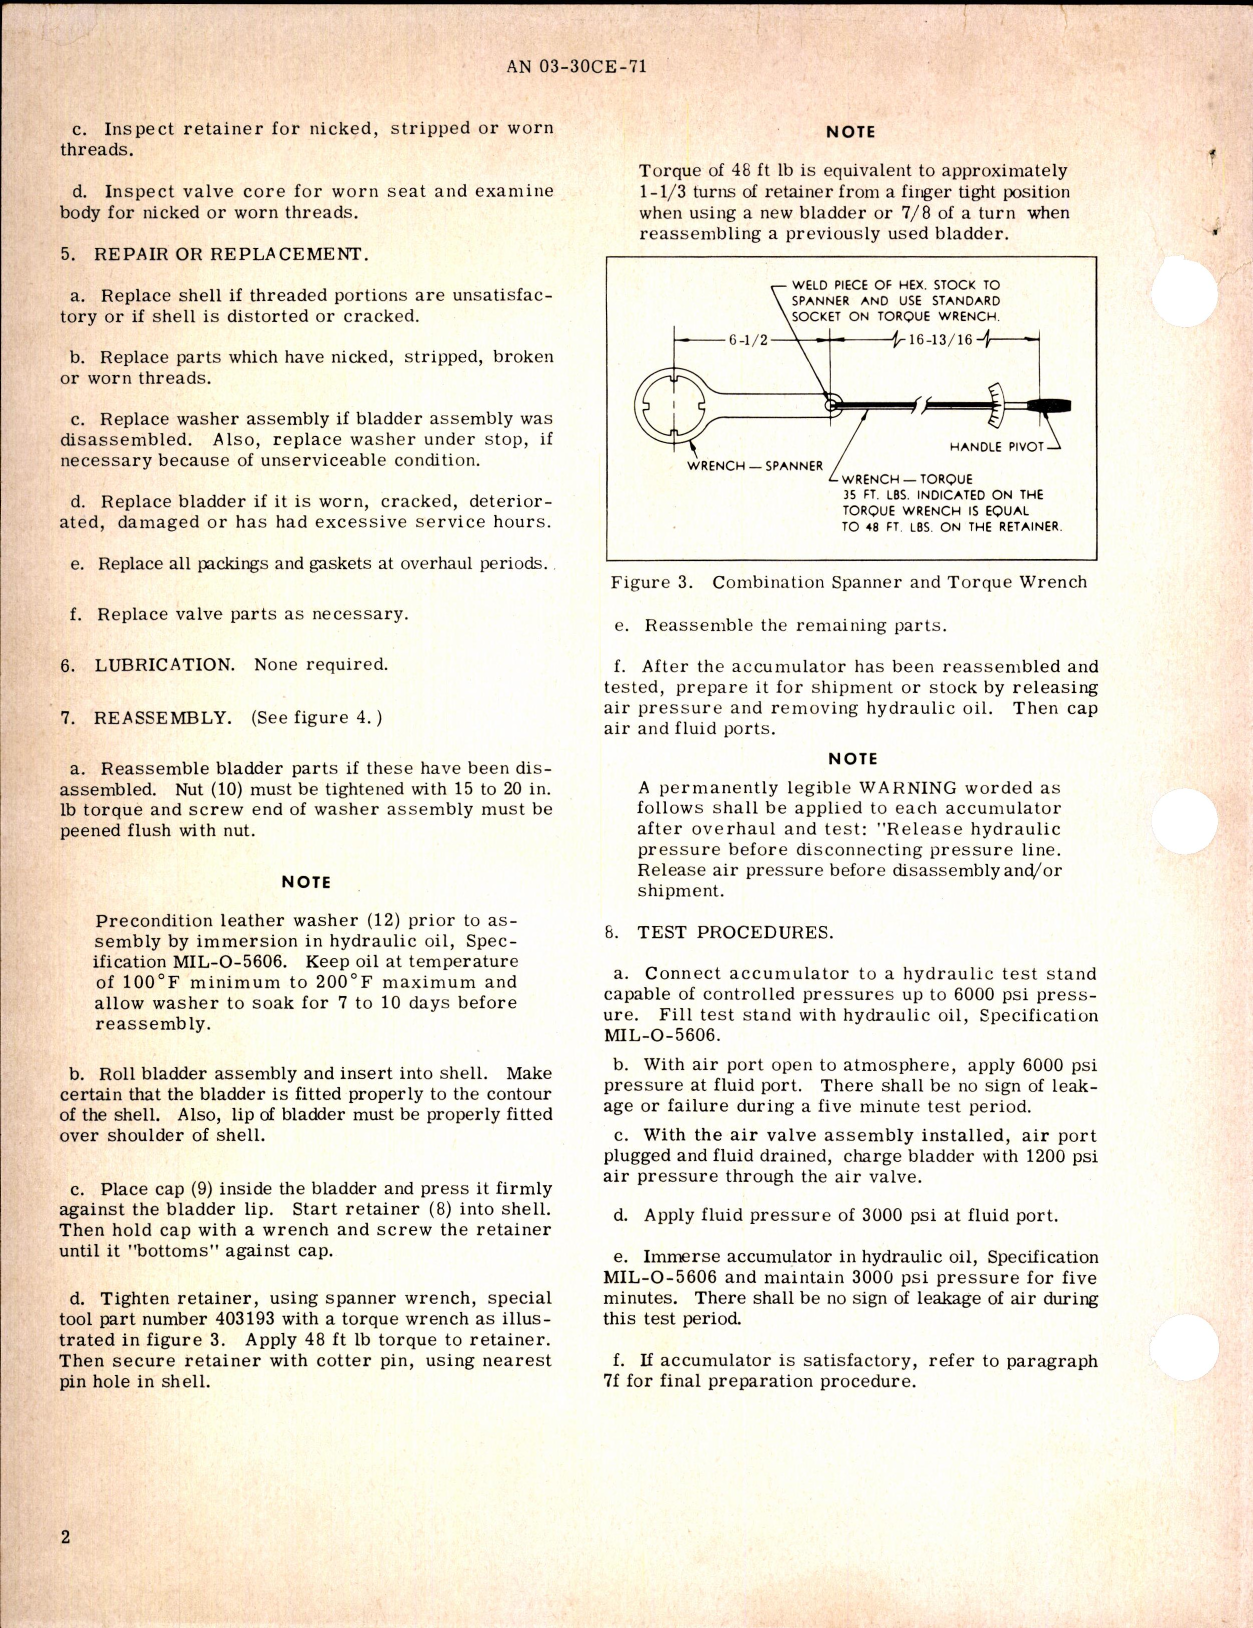 Sample page 2 from AirCorps Library document: 7 1-2 Inch High Pressure Hydraulic Accumulator